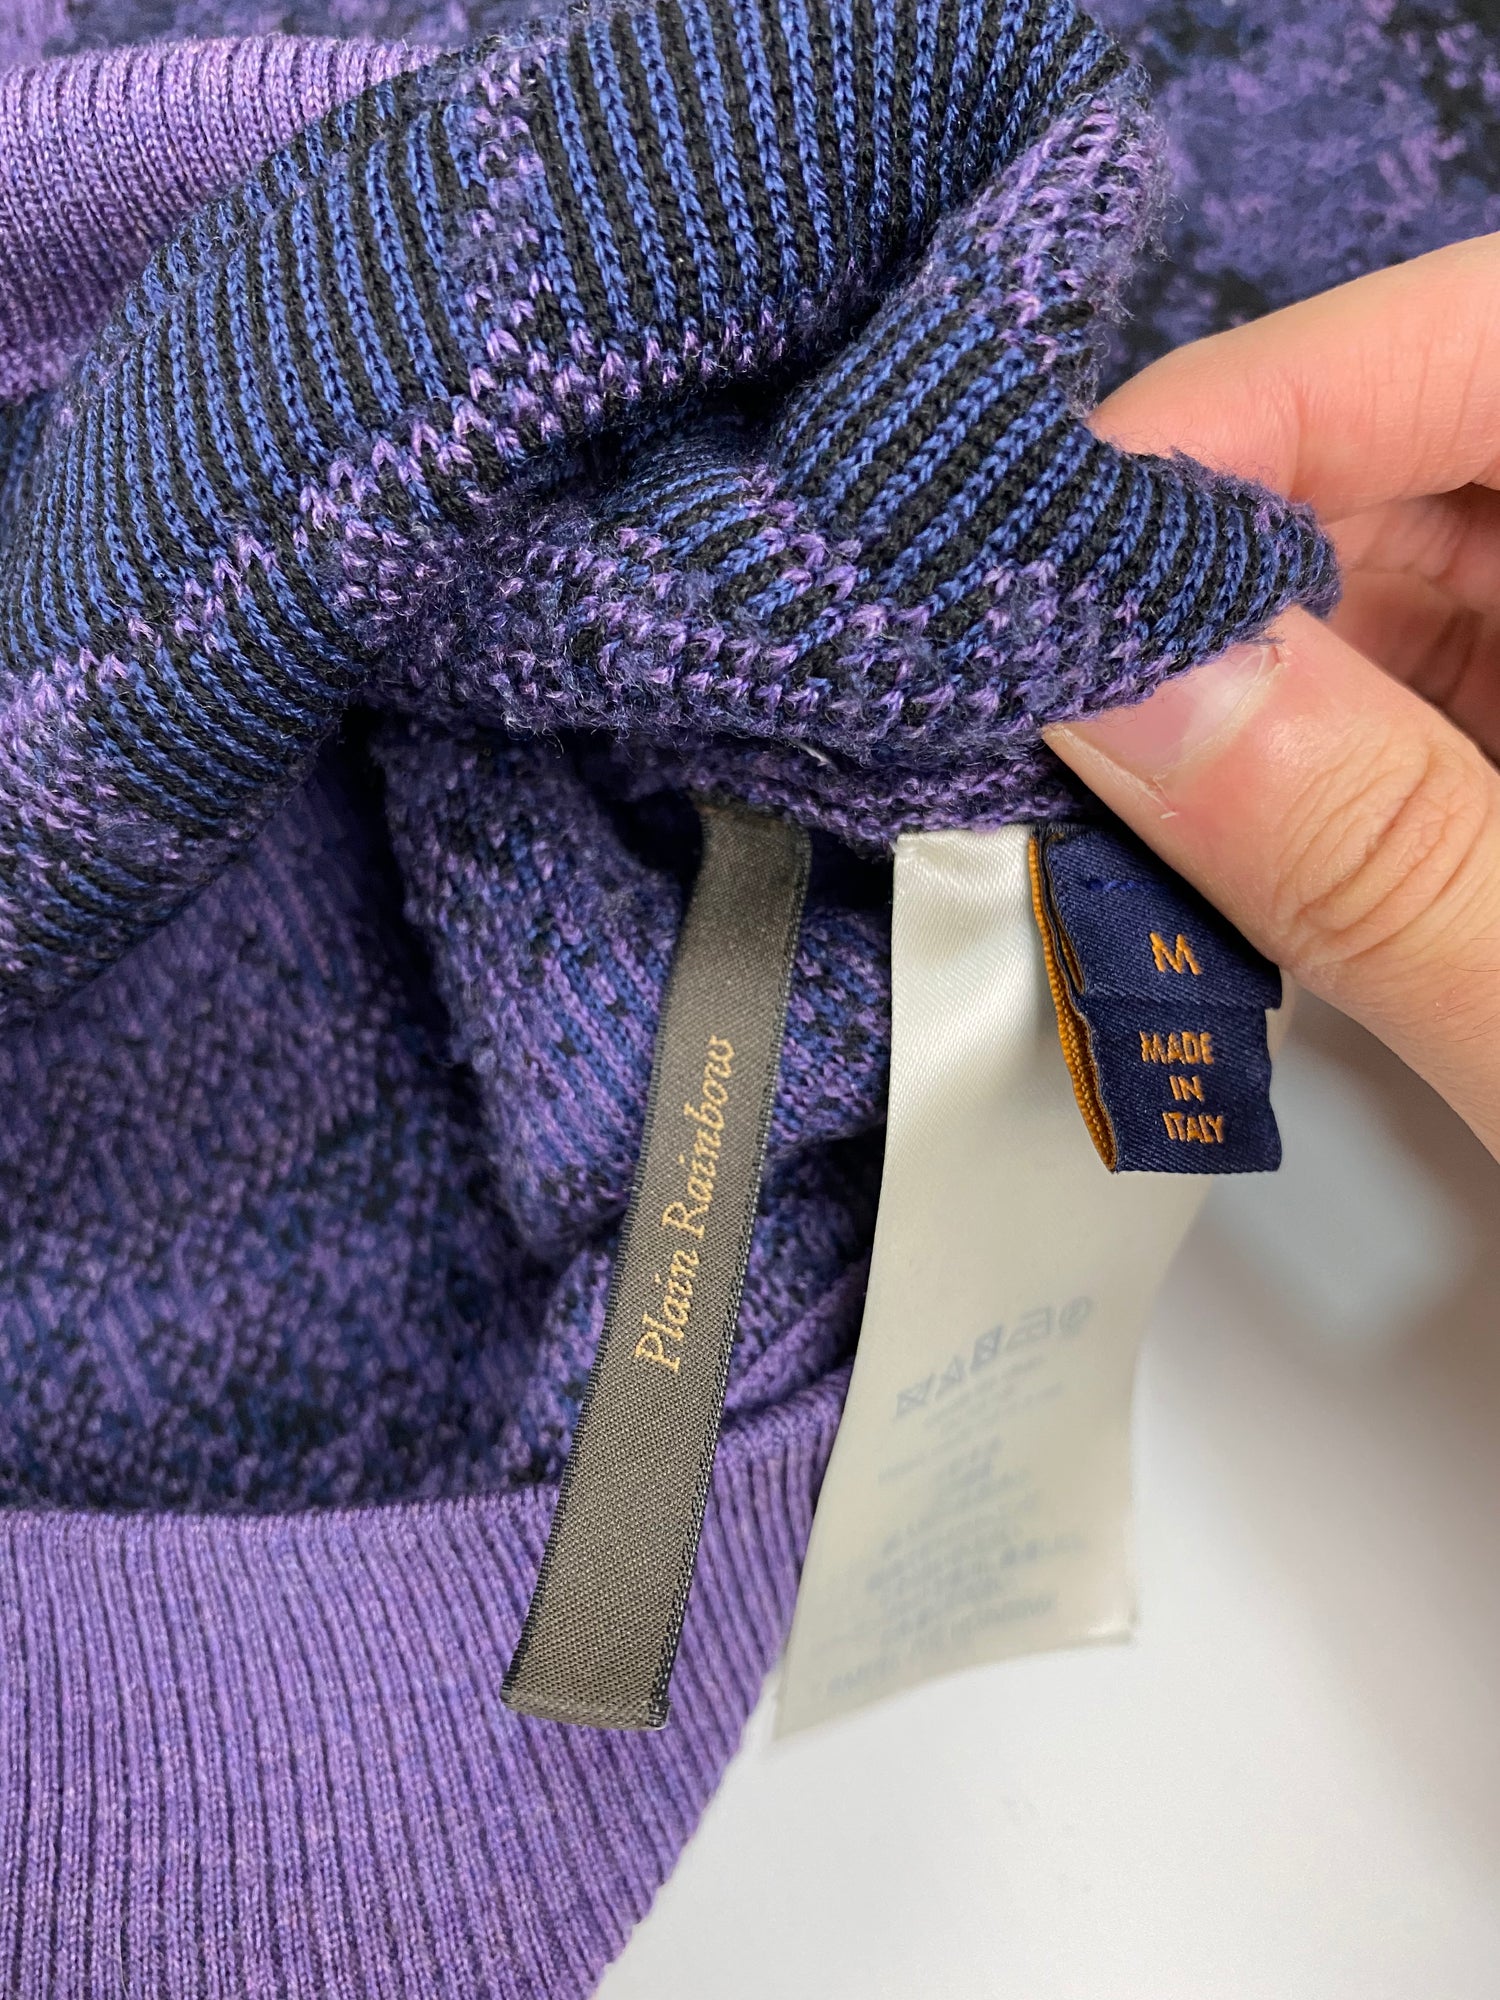 Louis Vuitton 2019 Brick Road Wool Sweater w/ Tags - Purple Sweaters,  Clothing - LOU219388